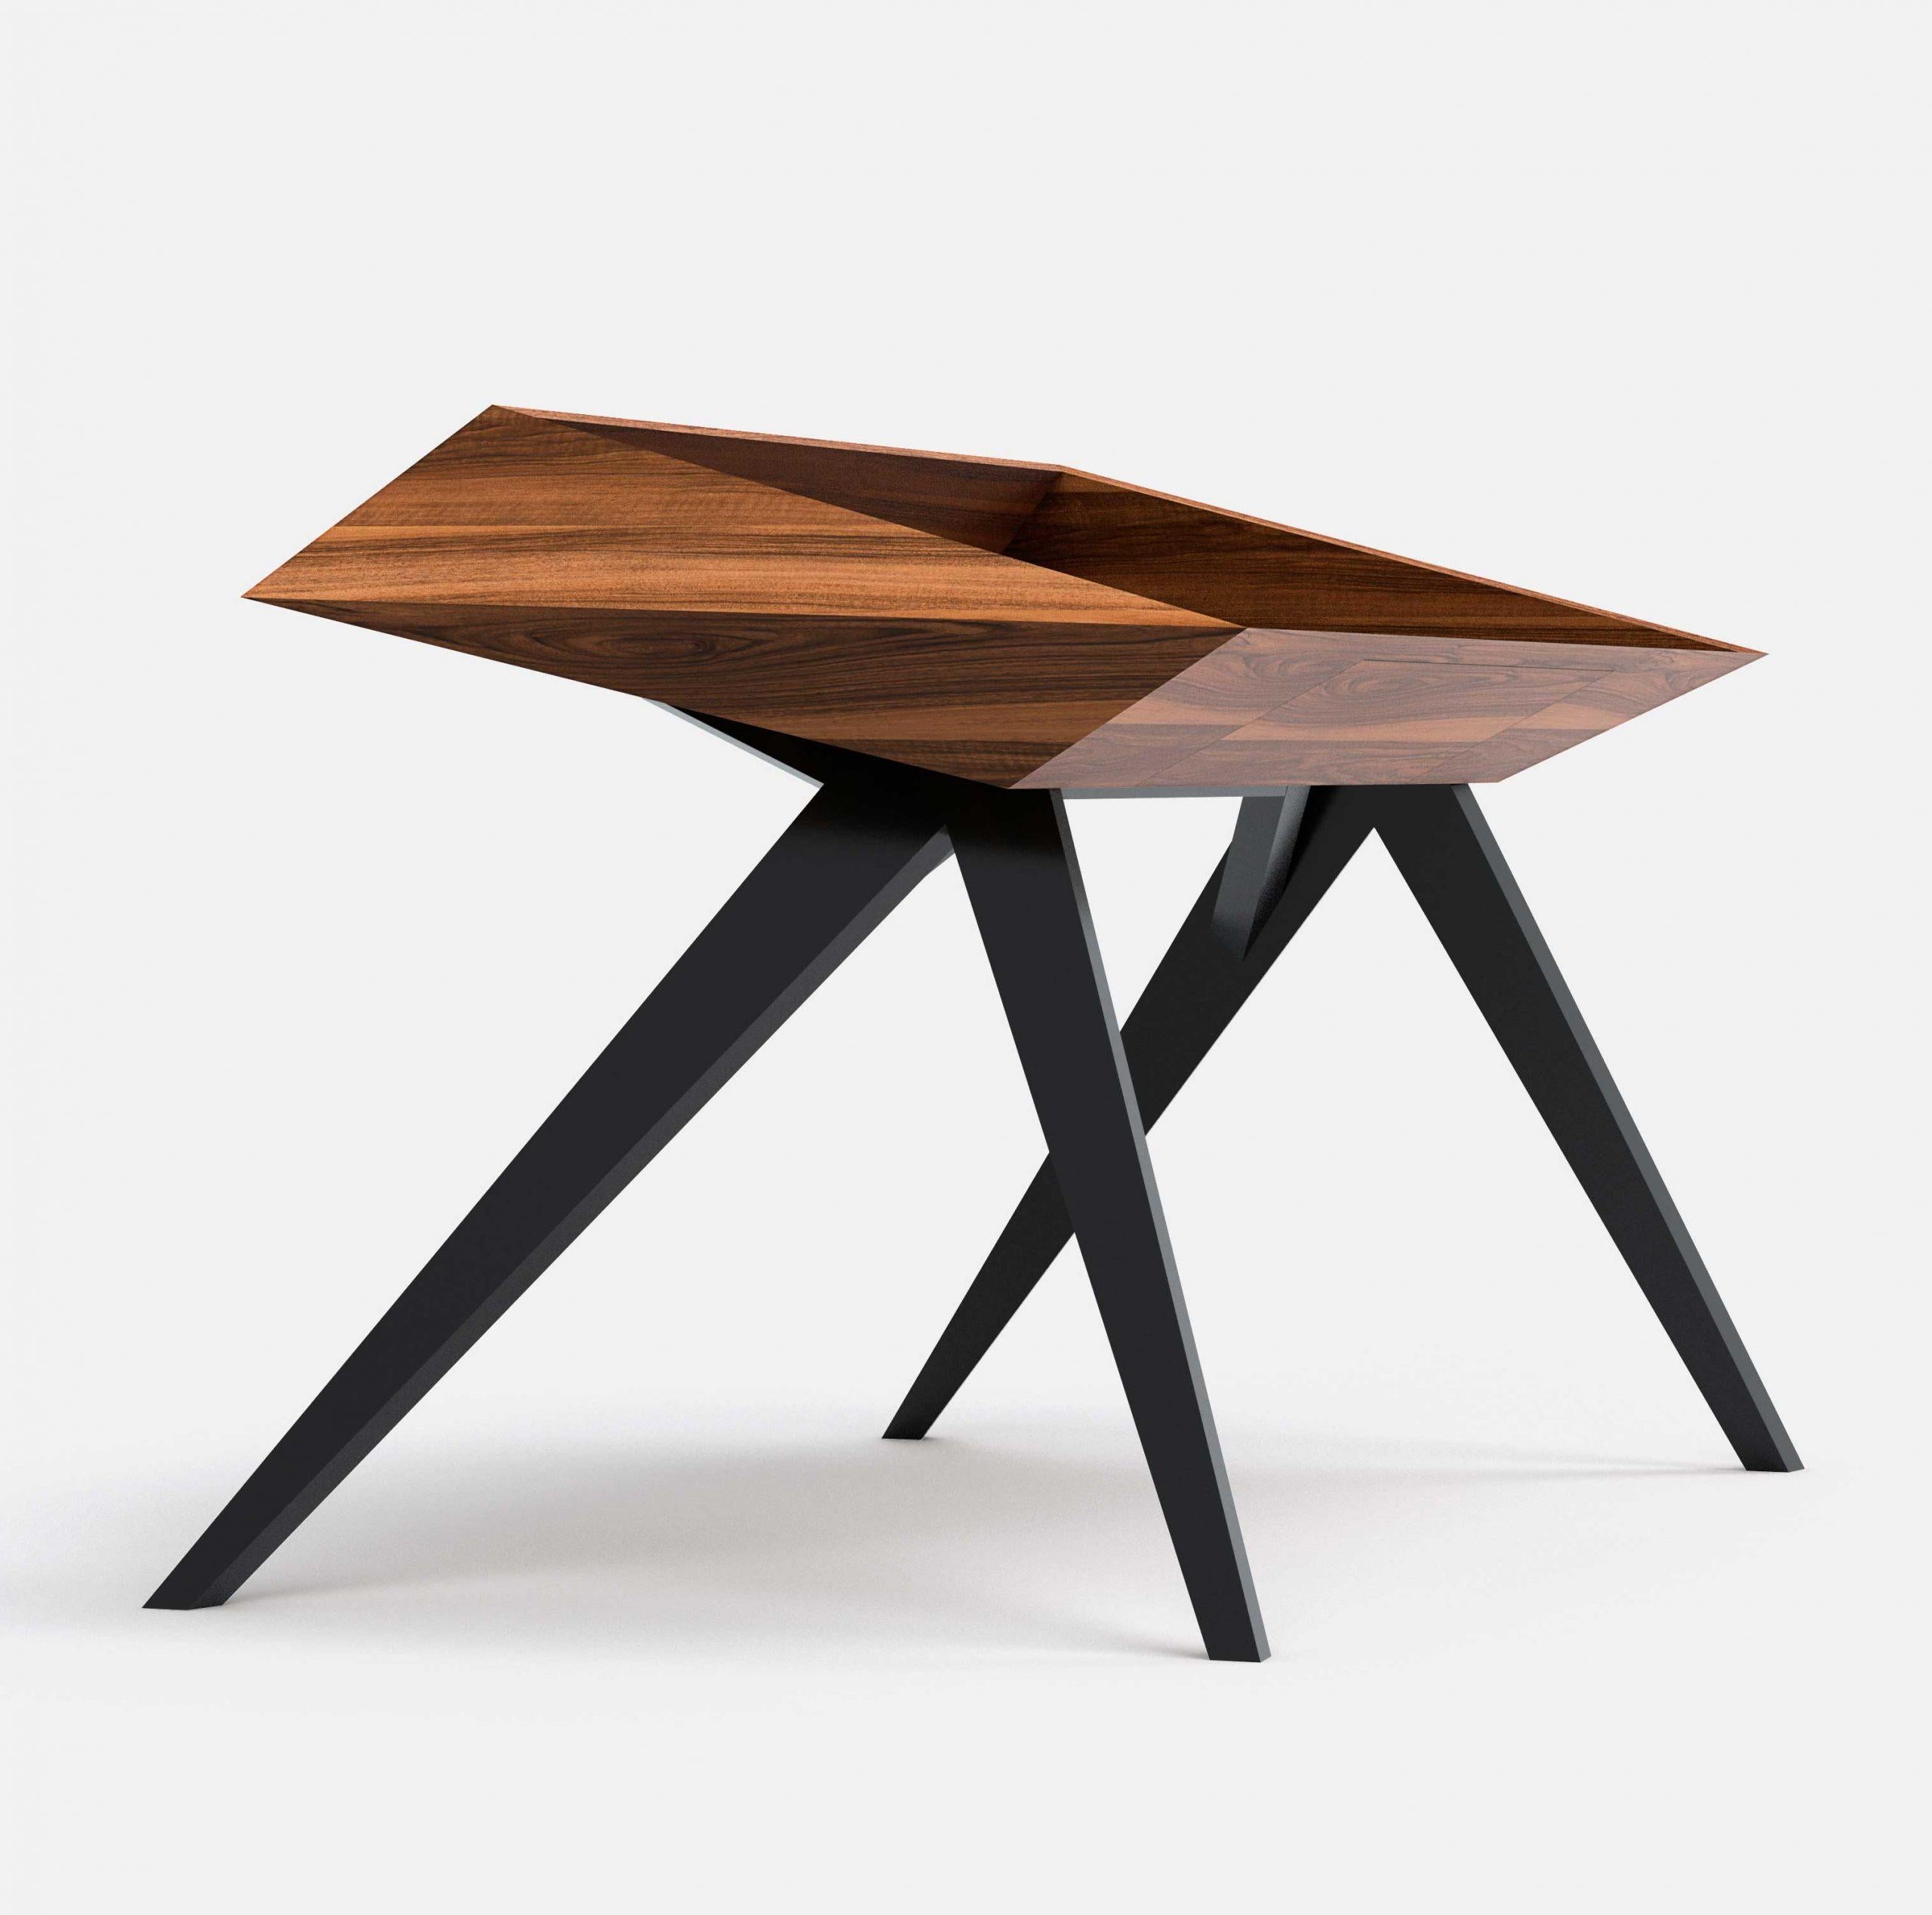 Wow desk by Alexandre Caldas
Dimensions: W 170 x D 80 x H 76 cm
Materials: Solid walnut wood, painted ash

Materials available in ash, beech, walnut
Dimensions available: W 100, W 120, W 150, W 170

Our values lie in the respect, protection and